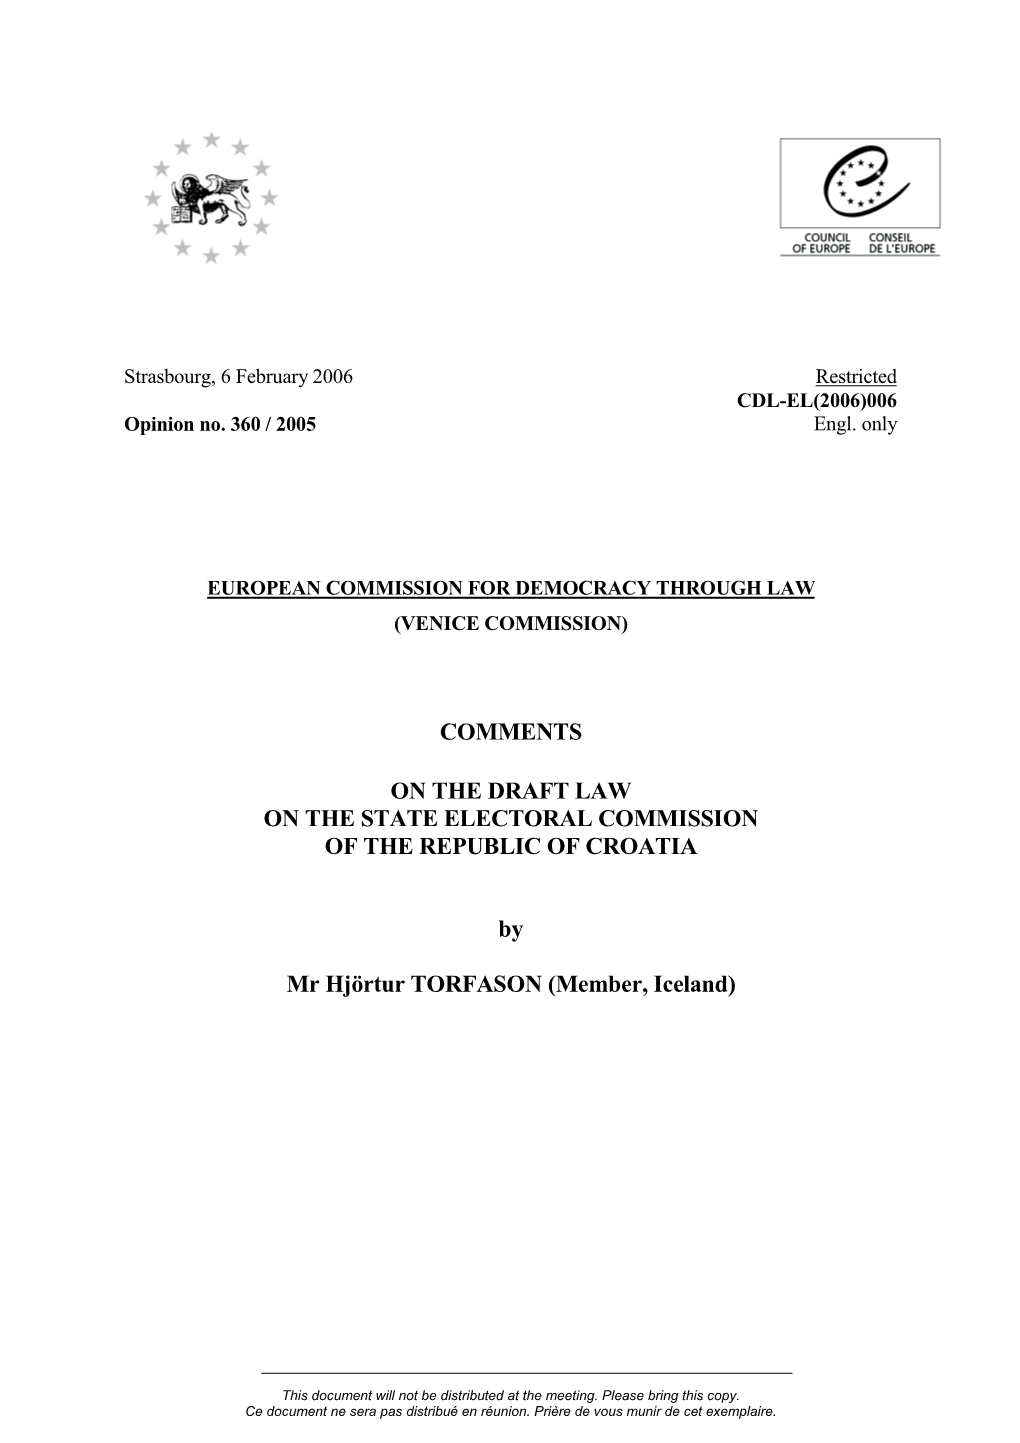 COMMENTS on the DRAFT LAW on the STATE ELECTORAL COMMISSION of the REPUBLIC of CROATIA by Mr Hjörtur TORFASON